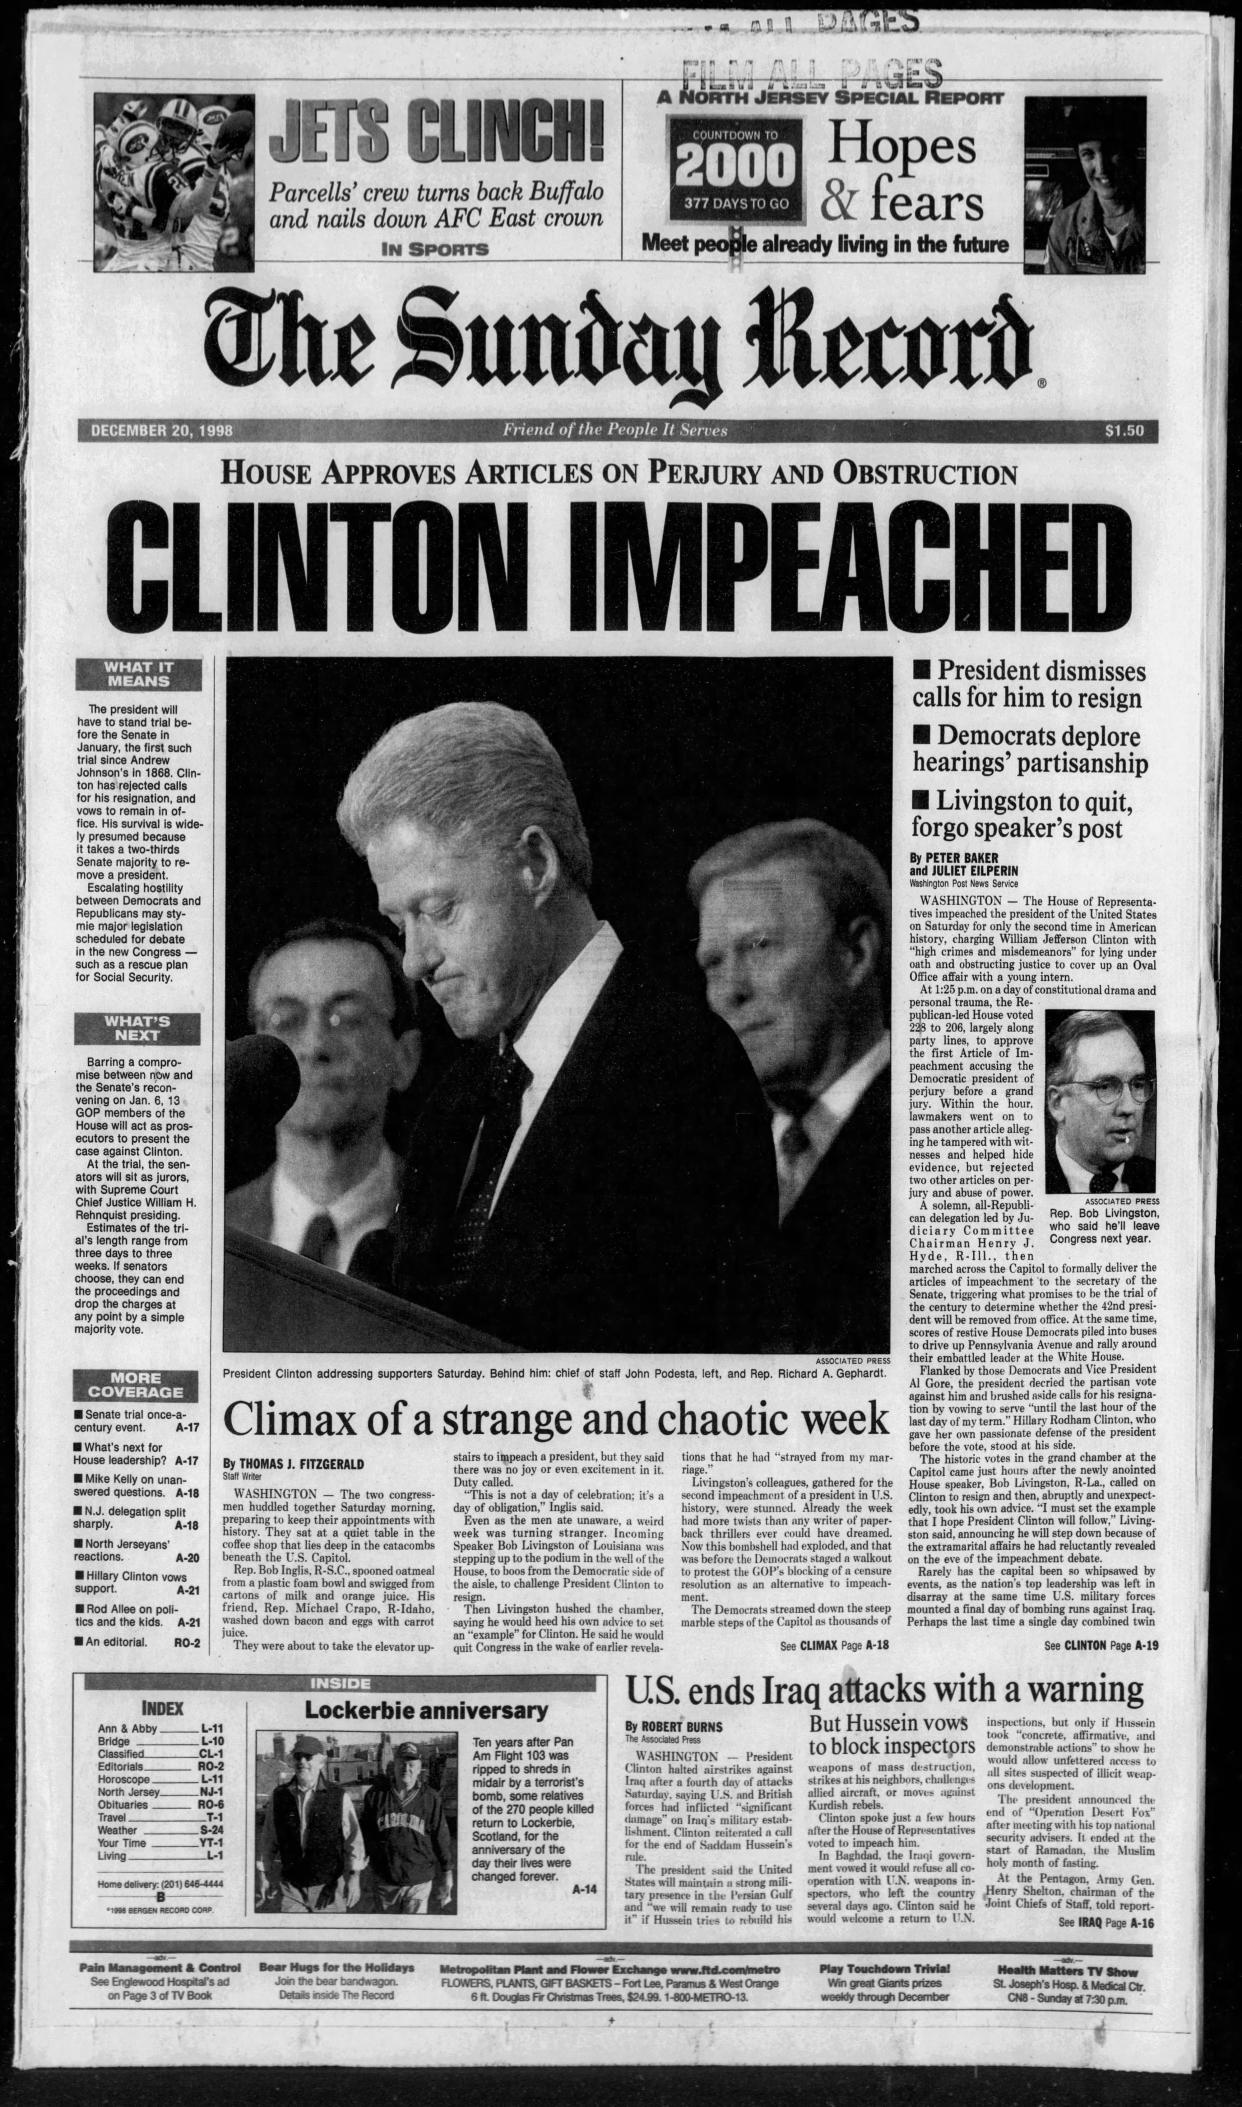 President Bill Clinton was impeached following the Monica Lewinsky scandal in December 1998.